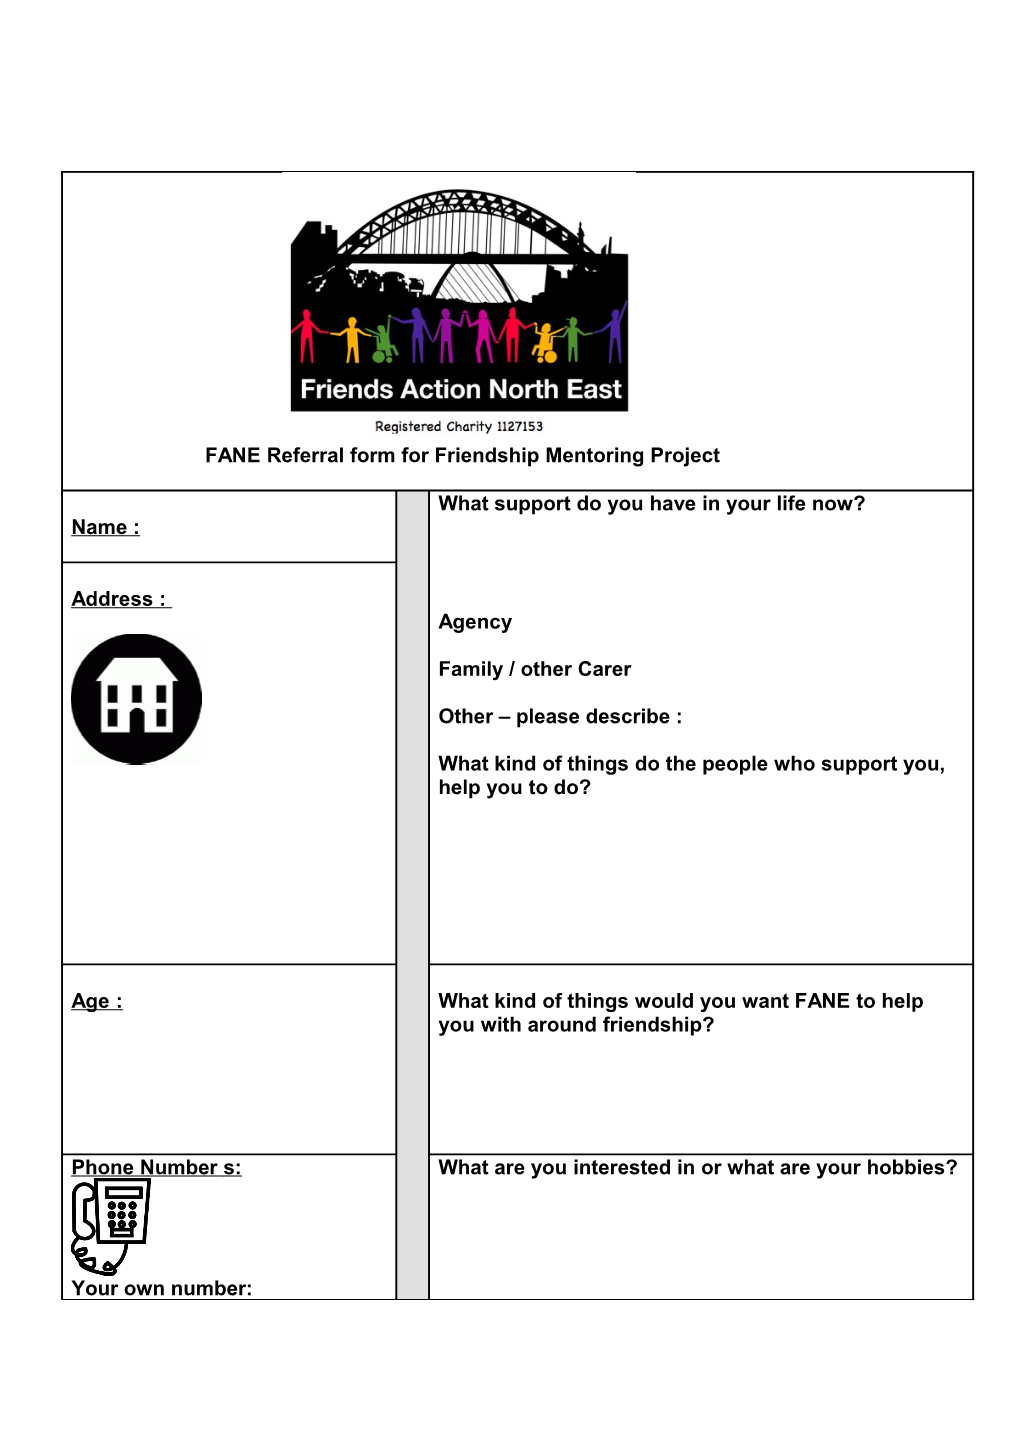 FANE Referral Form for Friendship Mentoring Project